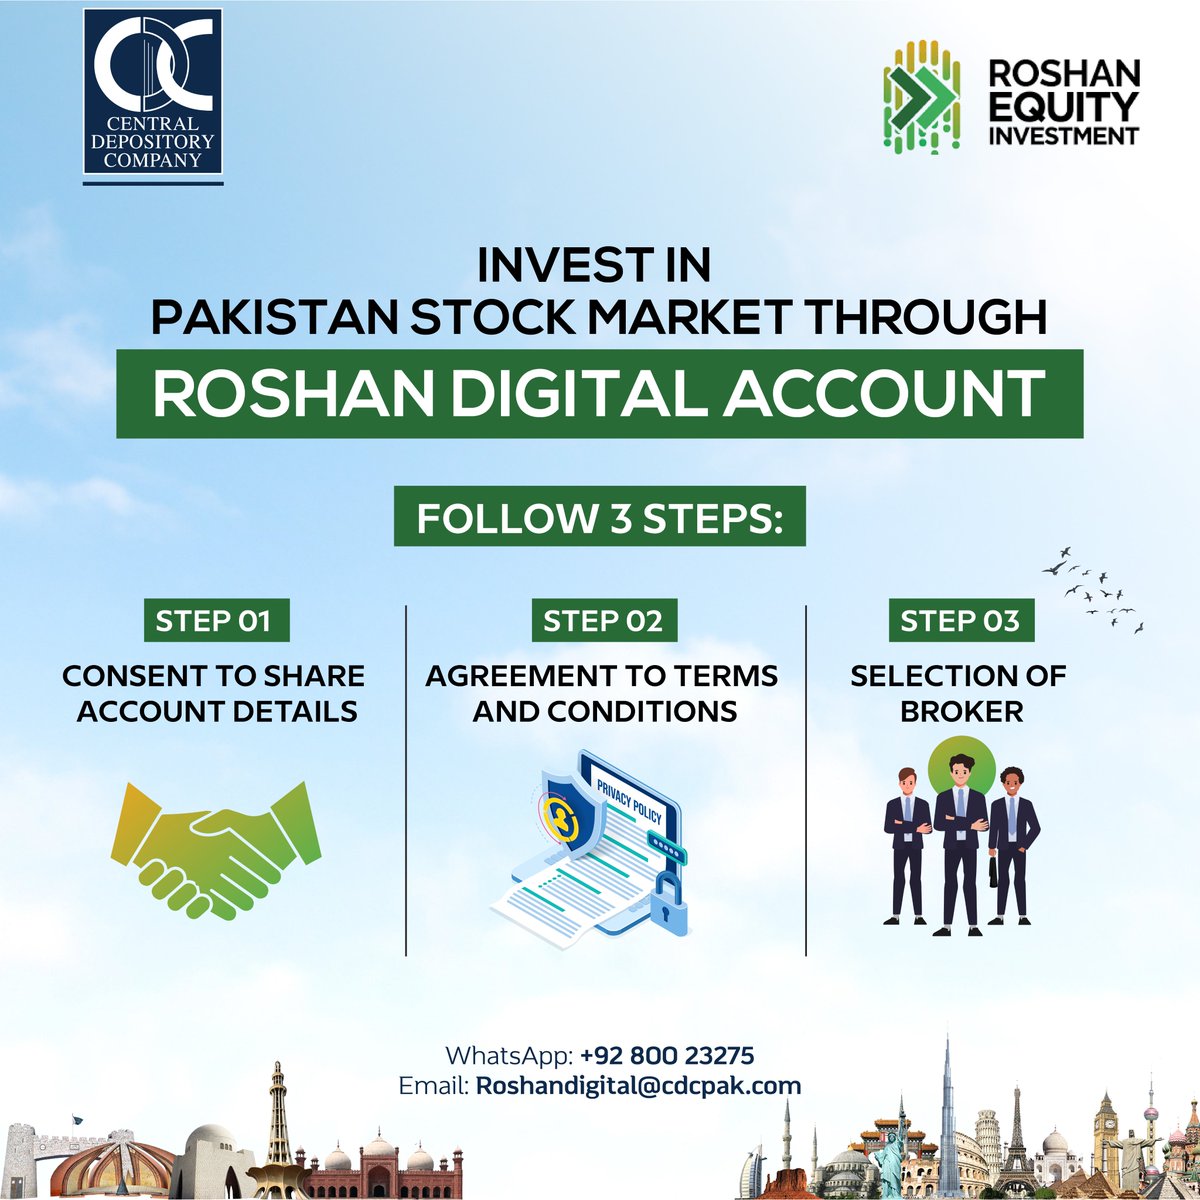 Through the Roshan Digital Account, Non-Resident Pakistanis can start investing in the Pakistan Stock Market via a simple and convenient three-step process on their bank's portal. #cdcpakistan #RoshanDigitalAccount